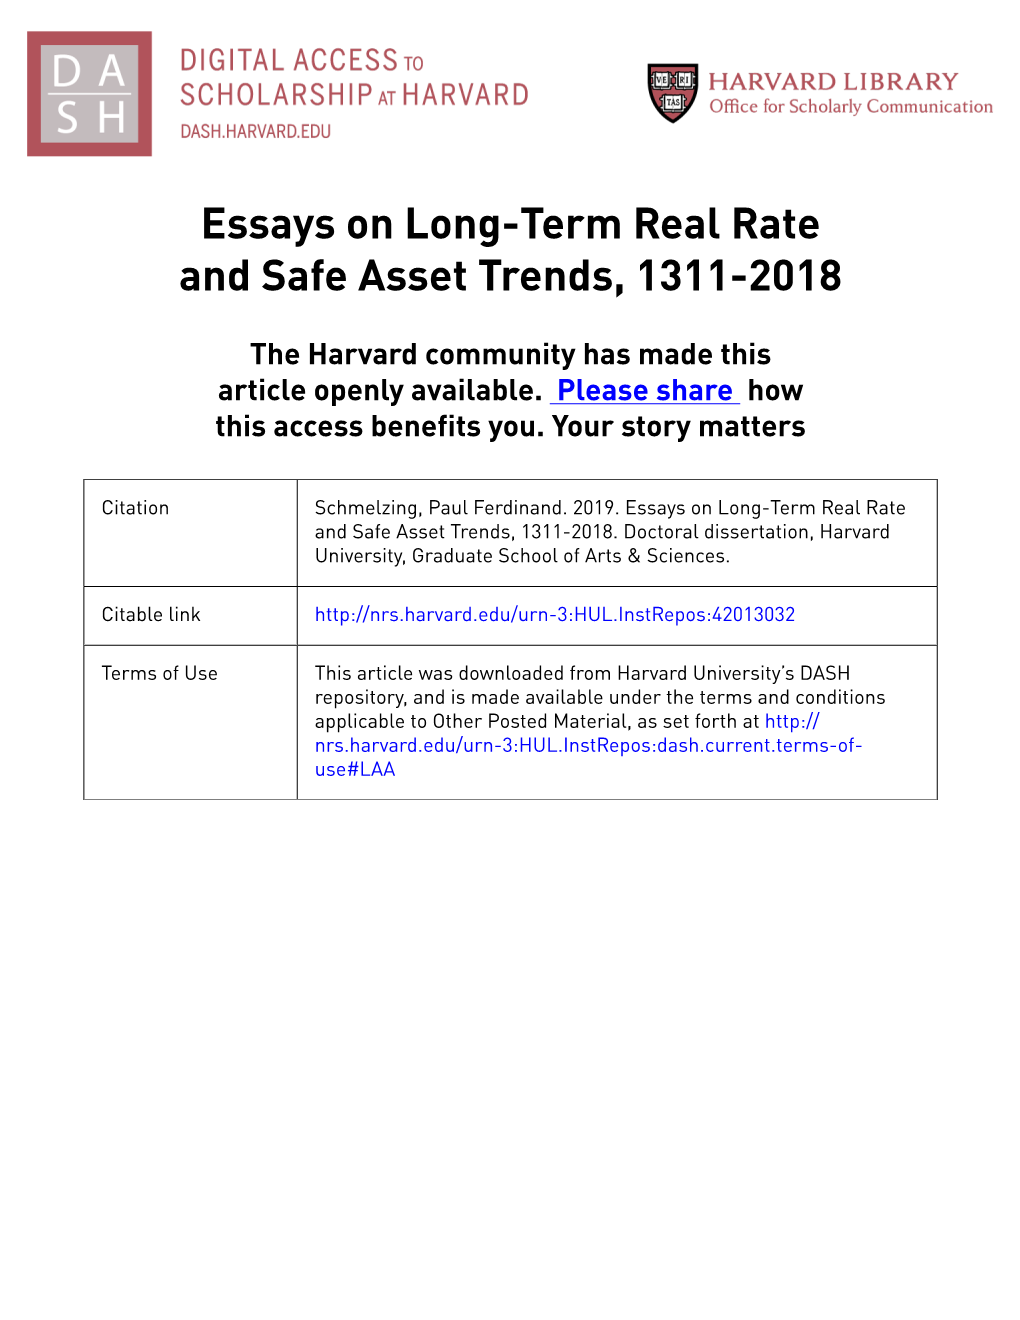 Essays on Long-Term Real Rate and Safe Asset Trends, 1311-2018